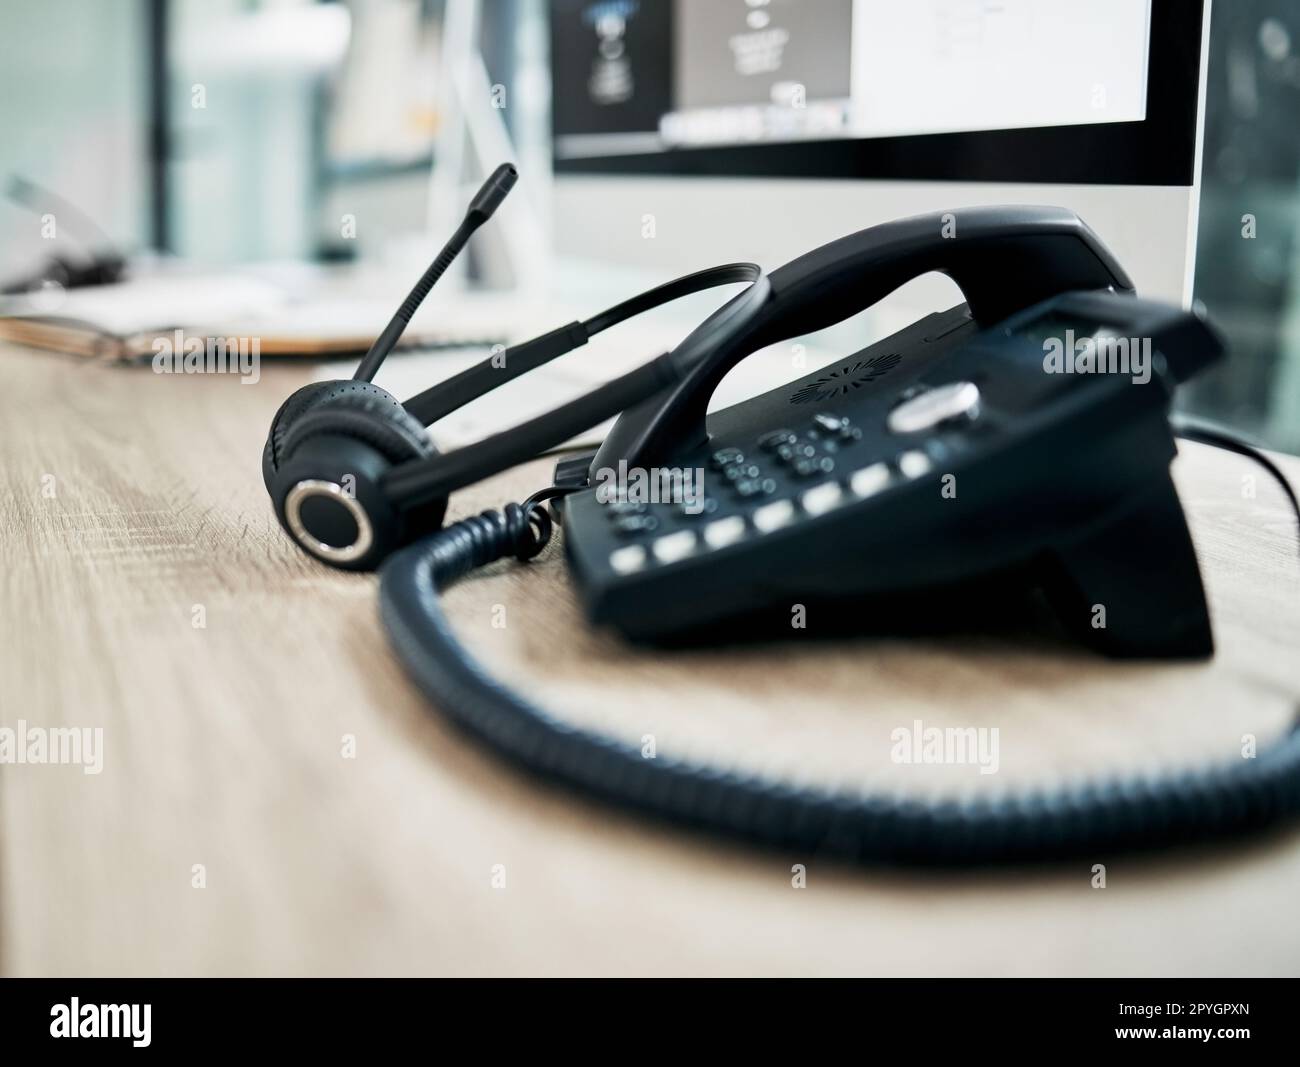 Telephone, contact us with call center, communication and headphone with microphone on work desk. Contact center, customer support and phone, consulting and customer service with callcenter voip. Stock Photo